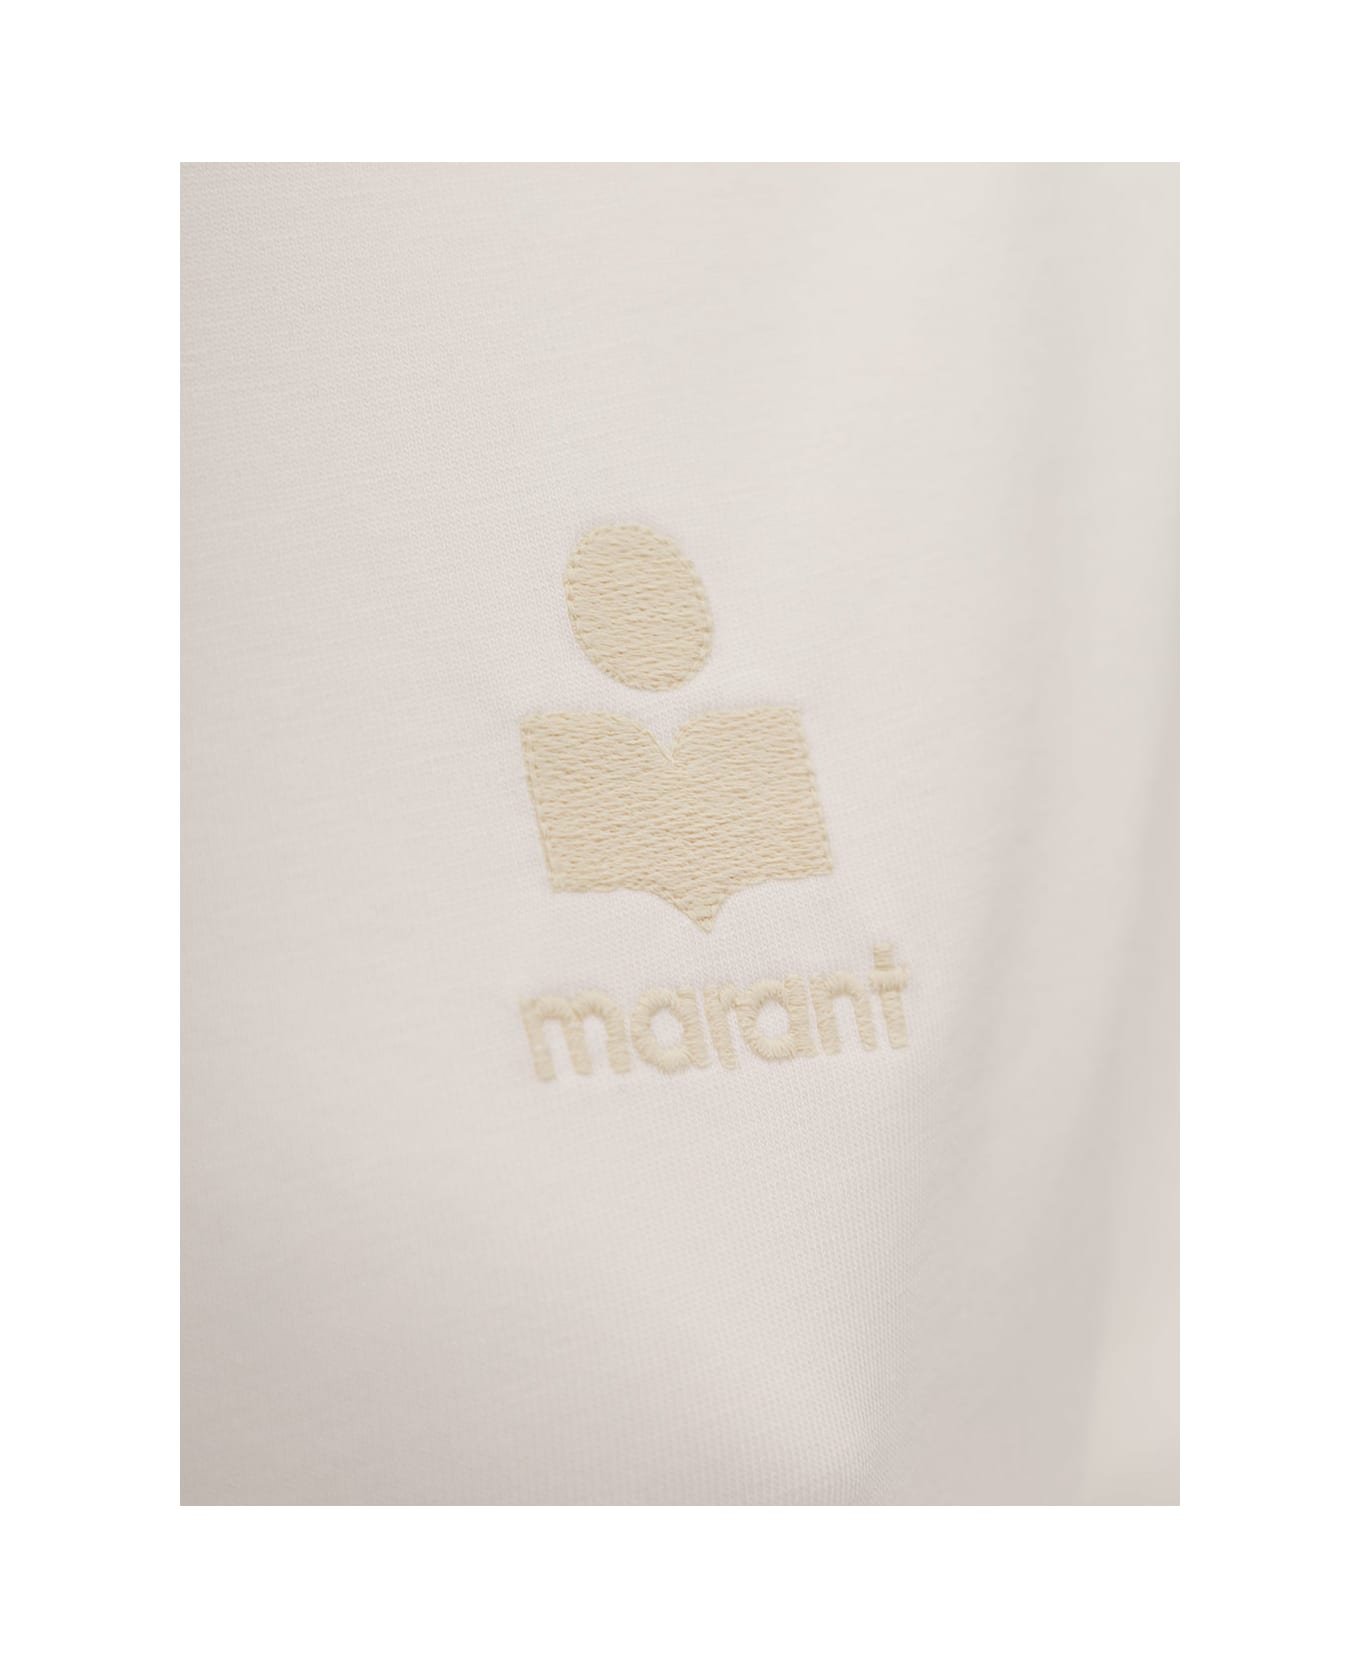 Marant Étoile Aby Regular Fit T-shirt - Wh White